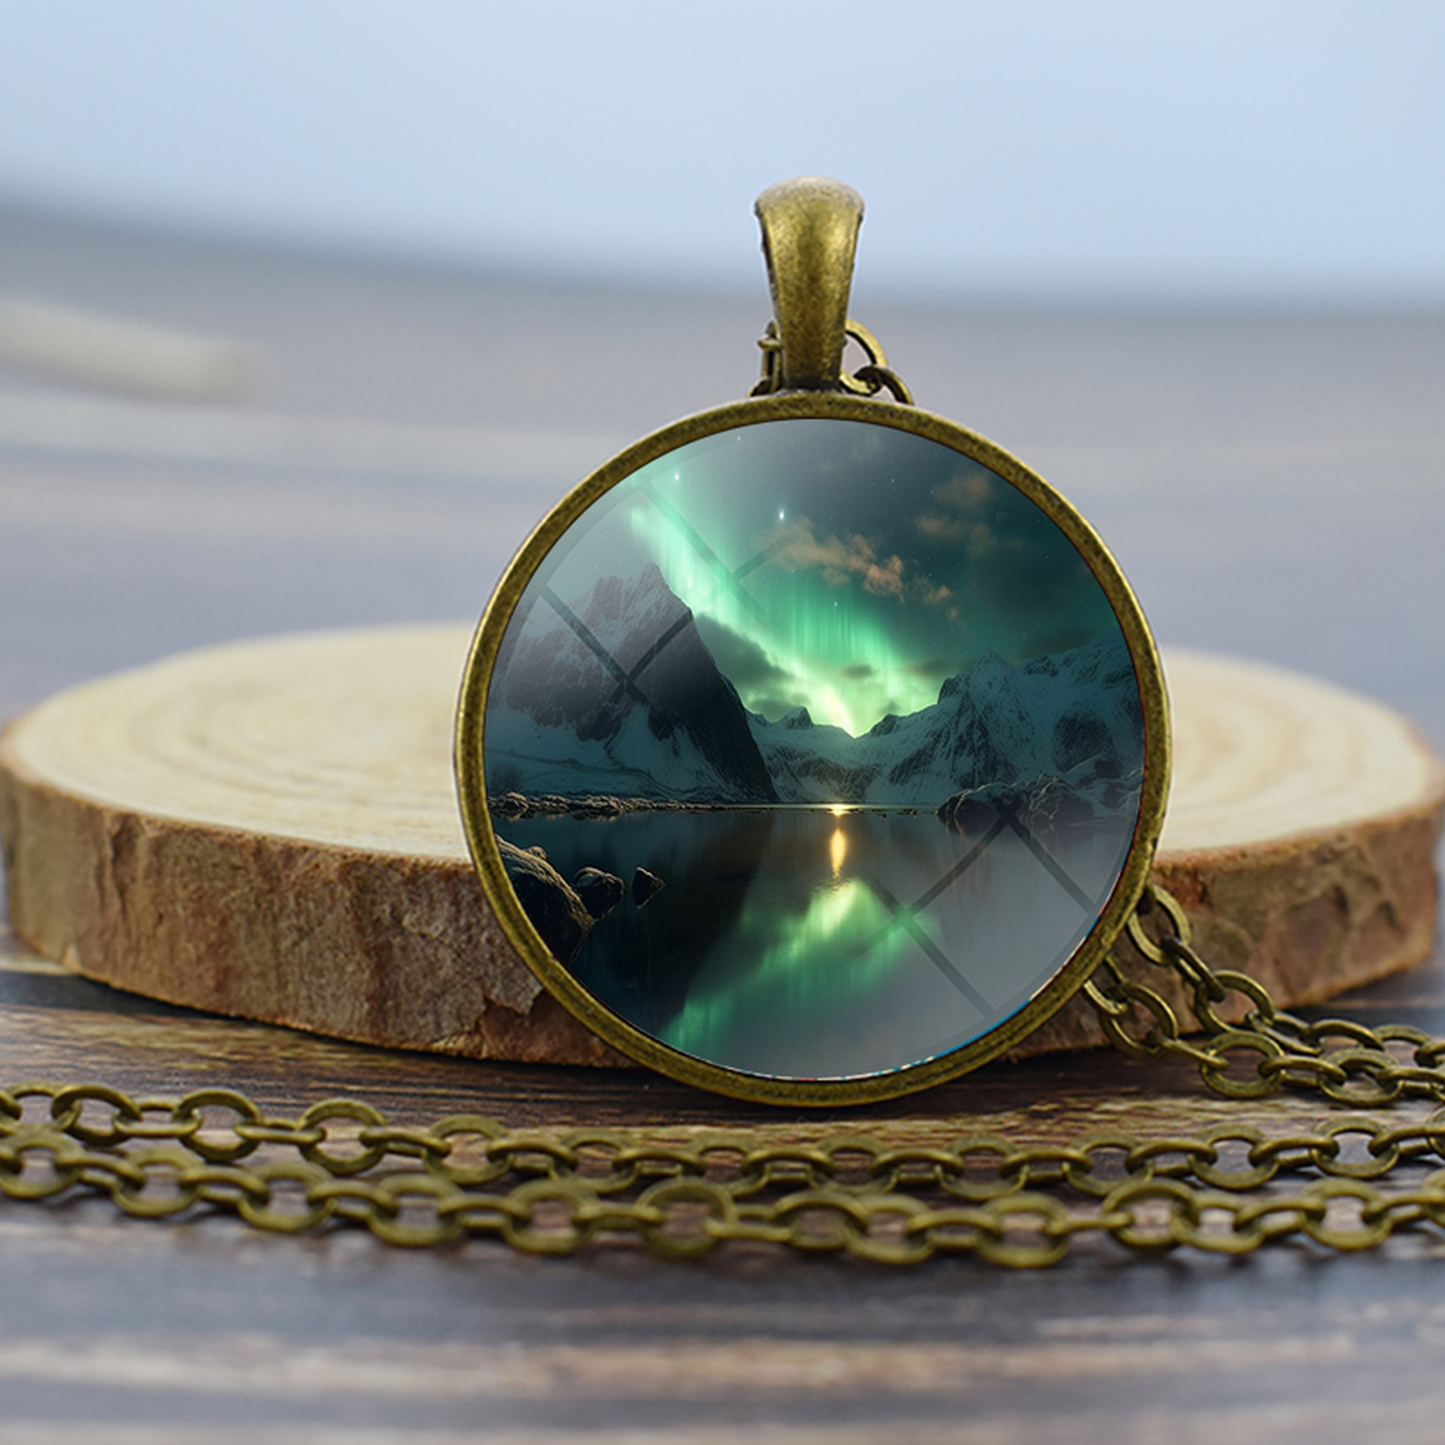 Unique Aurora Borealis Bronze Necklace - Northern Light Jewelry - Glass Dome Pendent Necklace - Perfect Aurora Lovers Gift 8